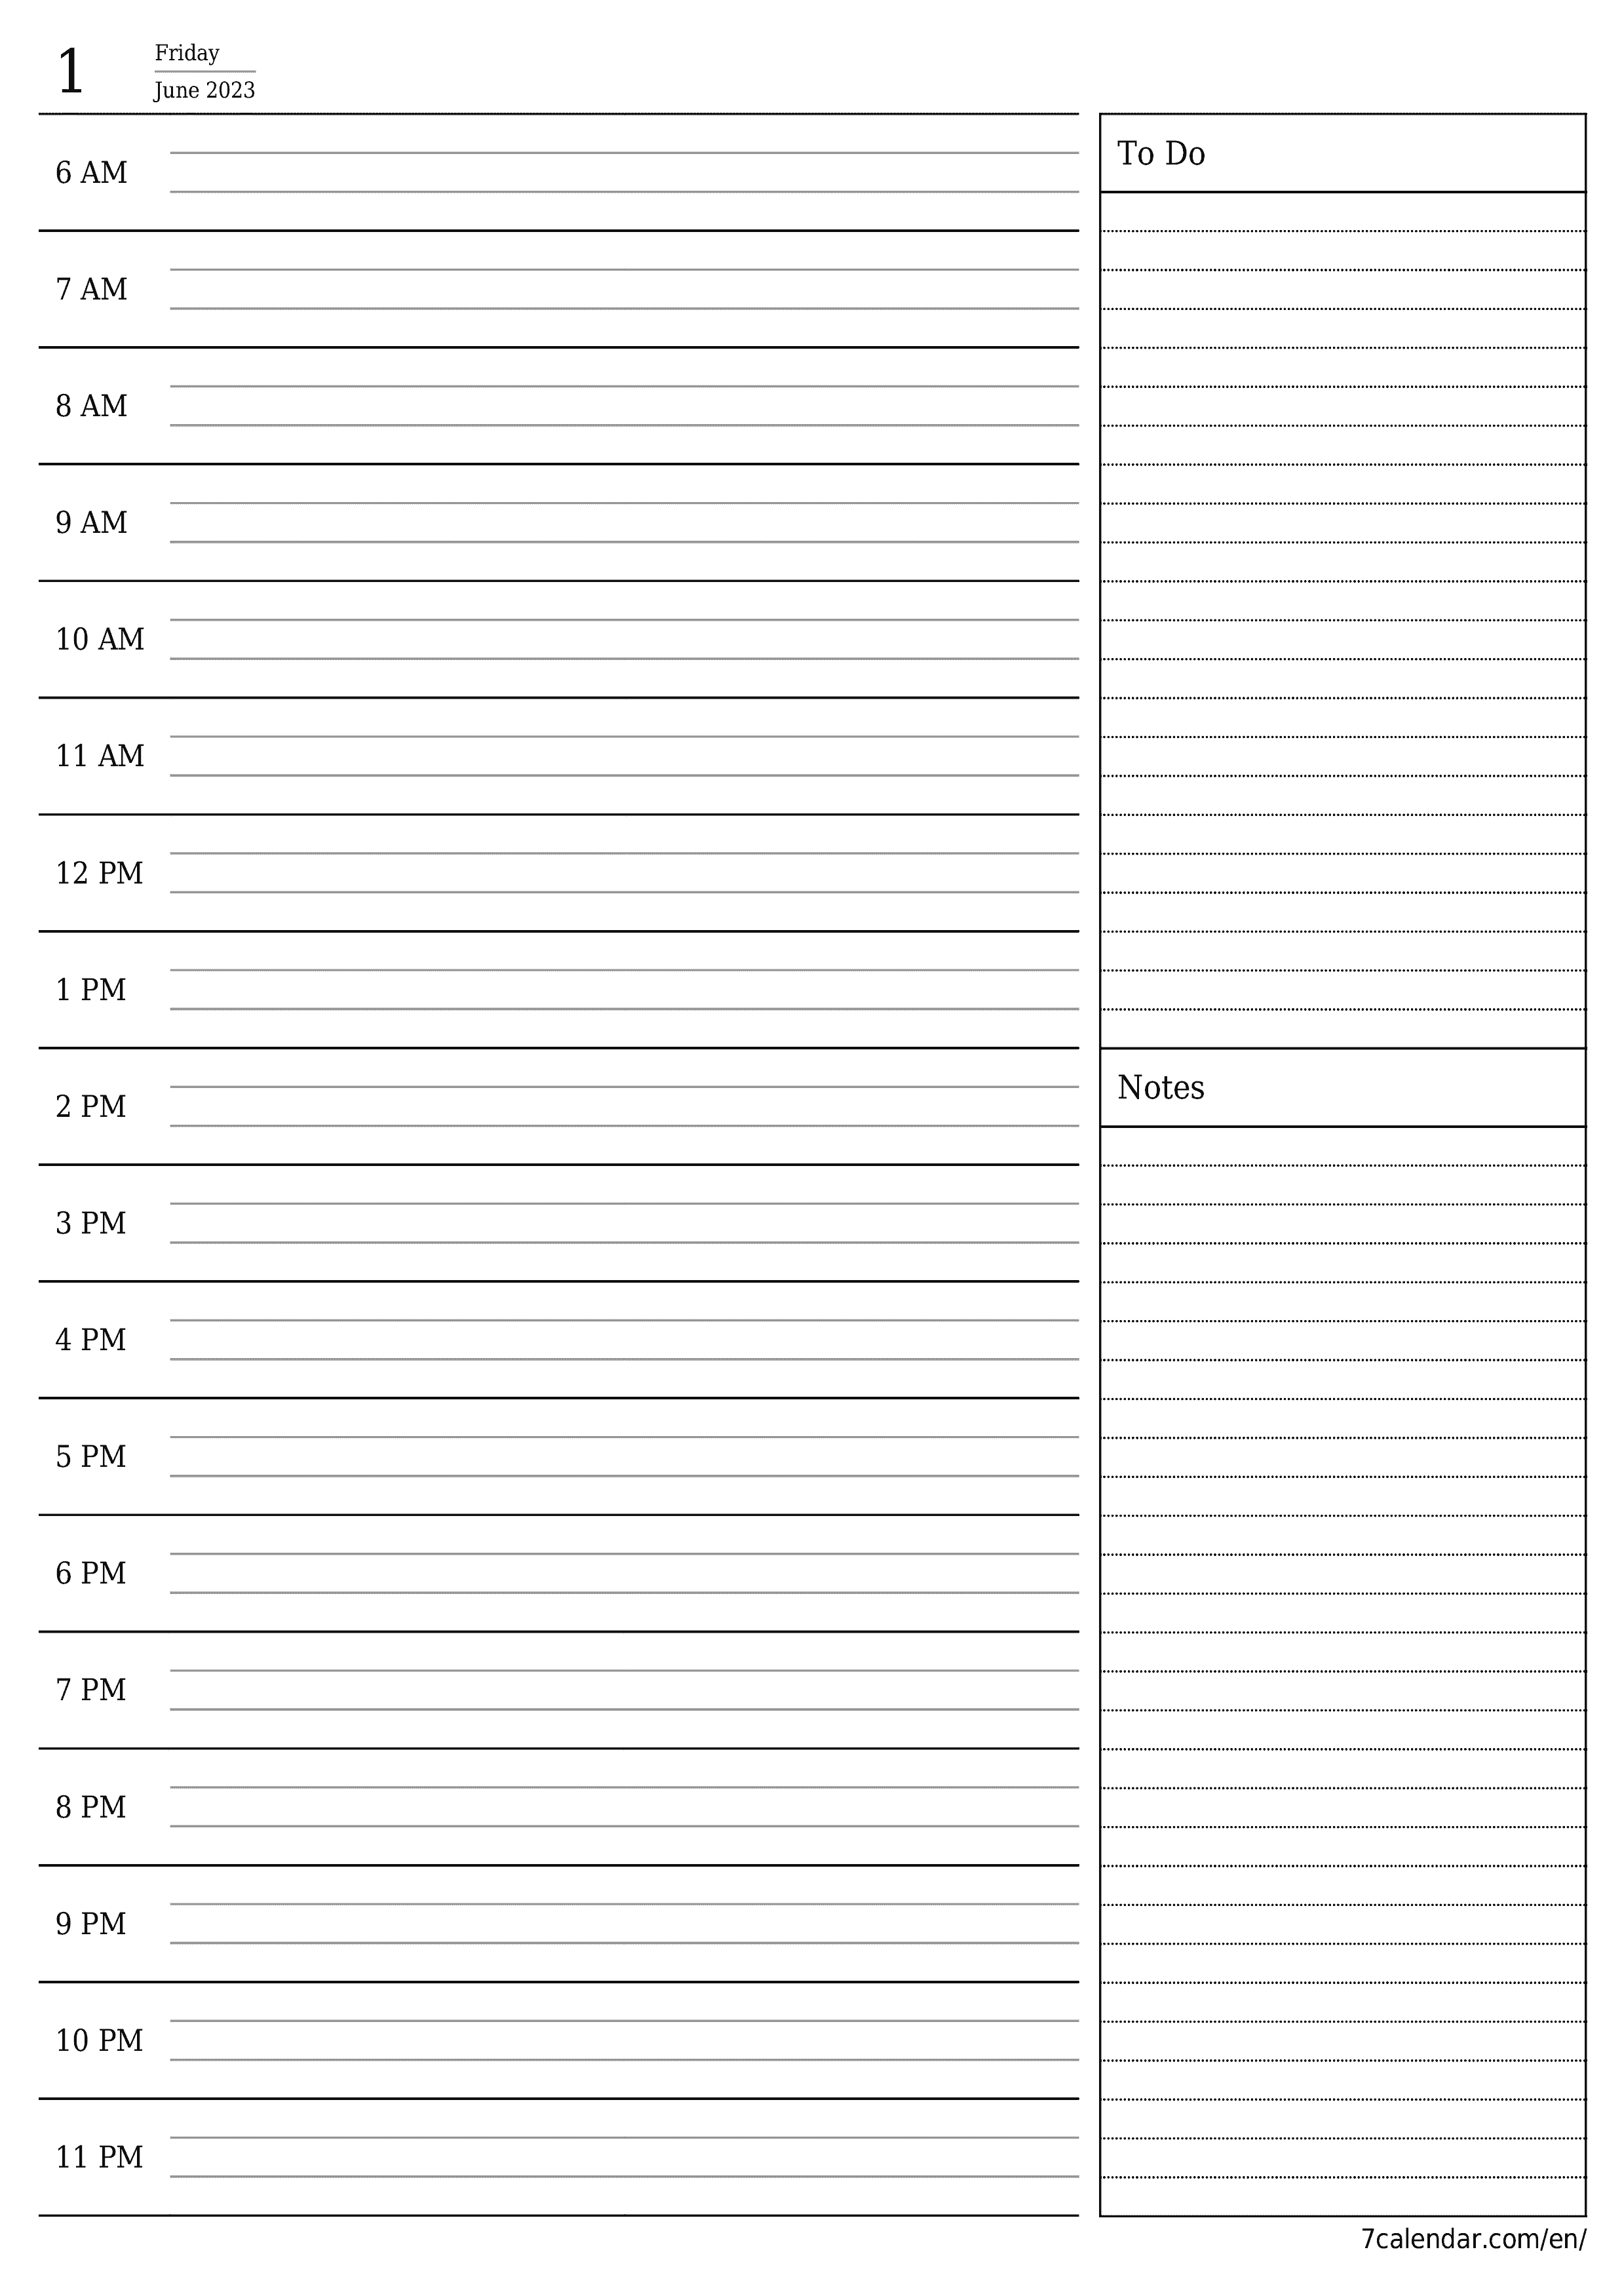 Blank daily printable calendar and planner for day June 2023 with notes, save and print to PDF PNG English